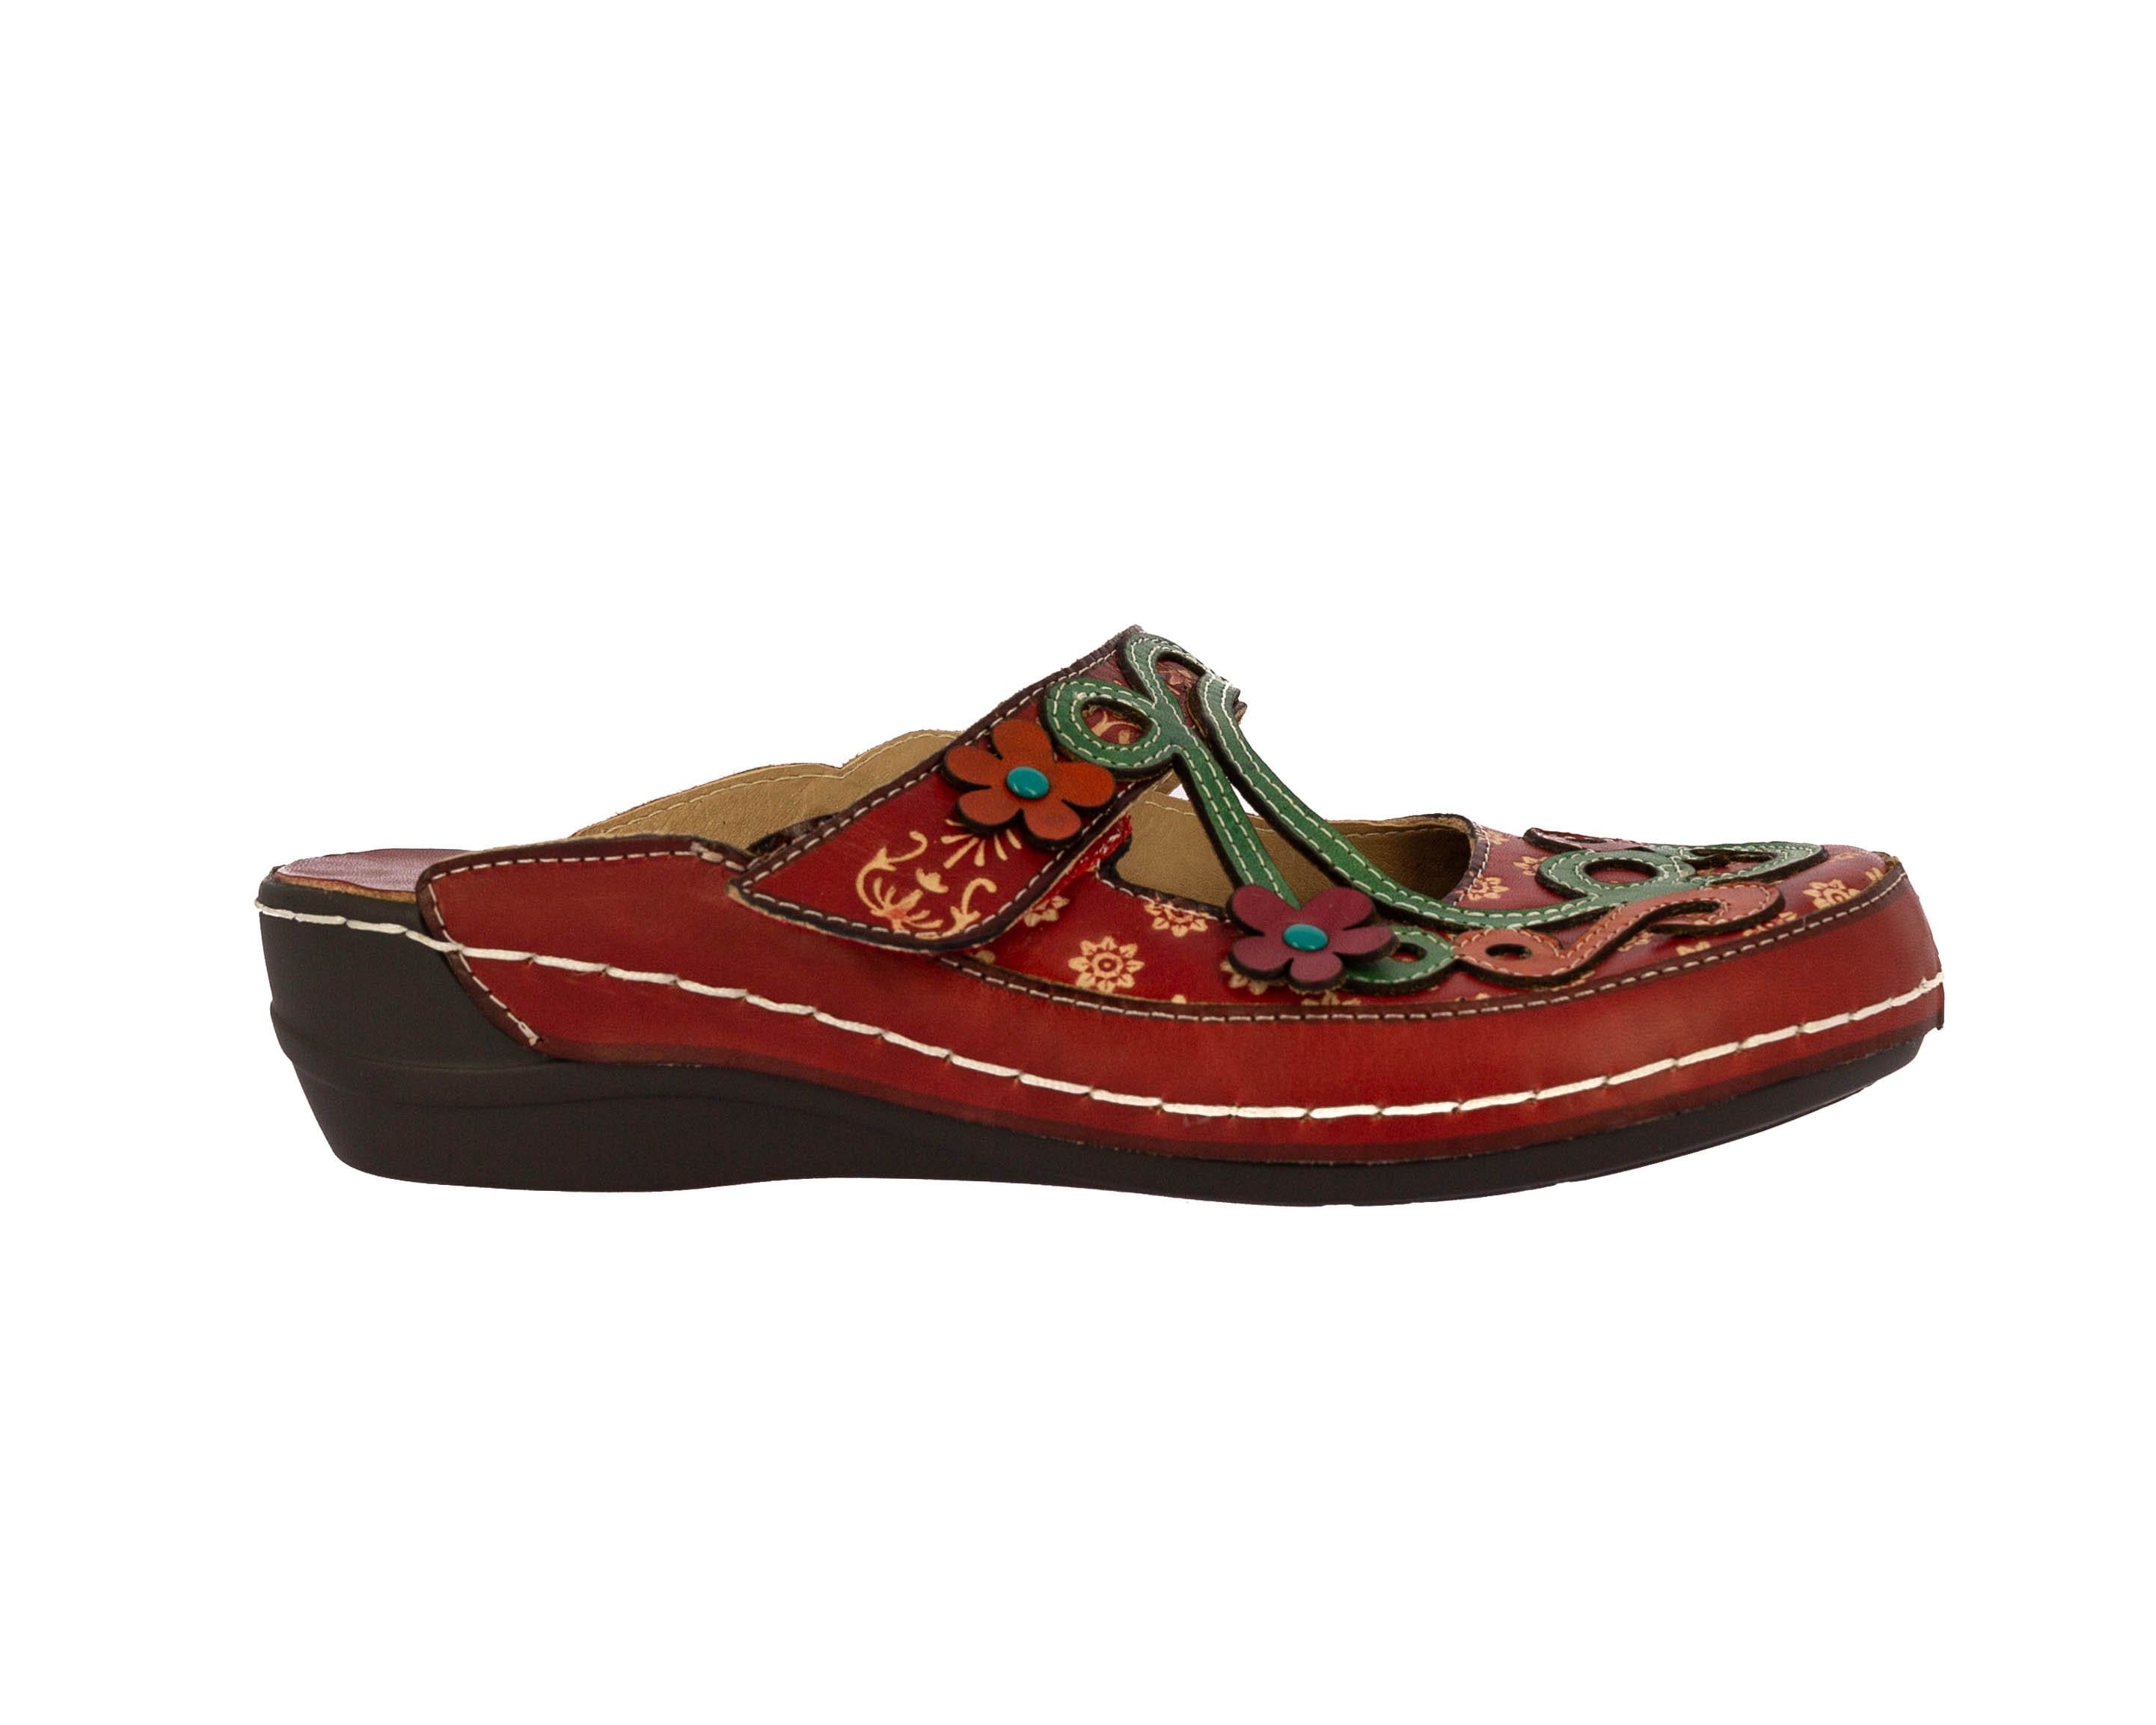 HECTO 08 skor - 35 / RED - Mulle